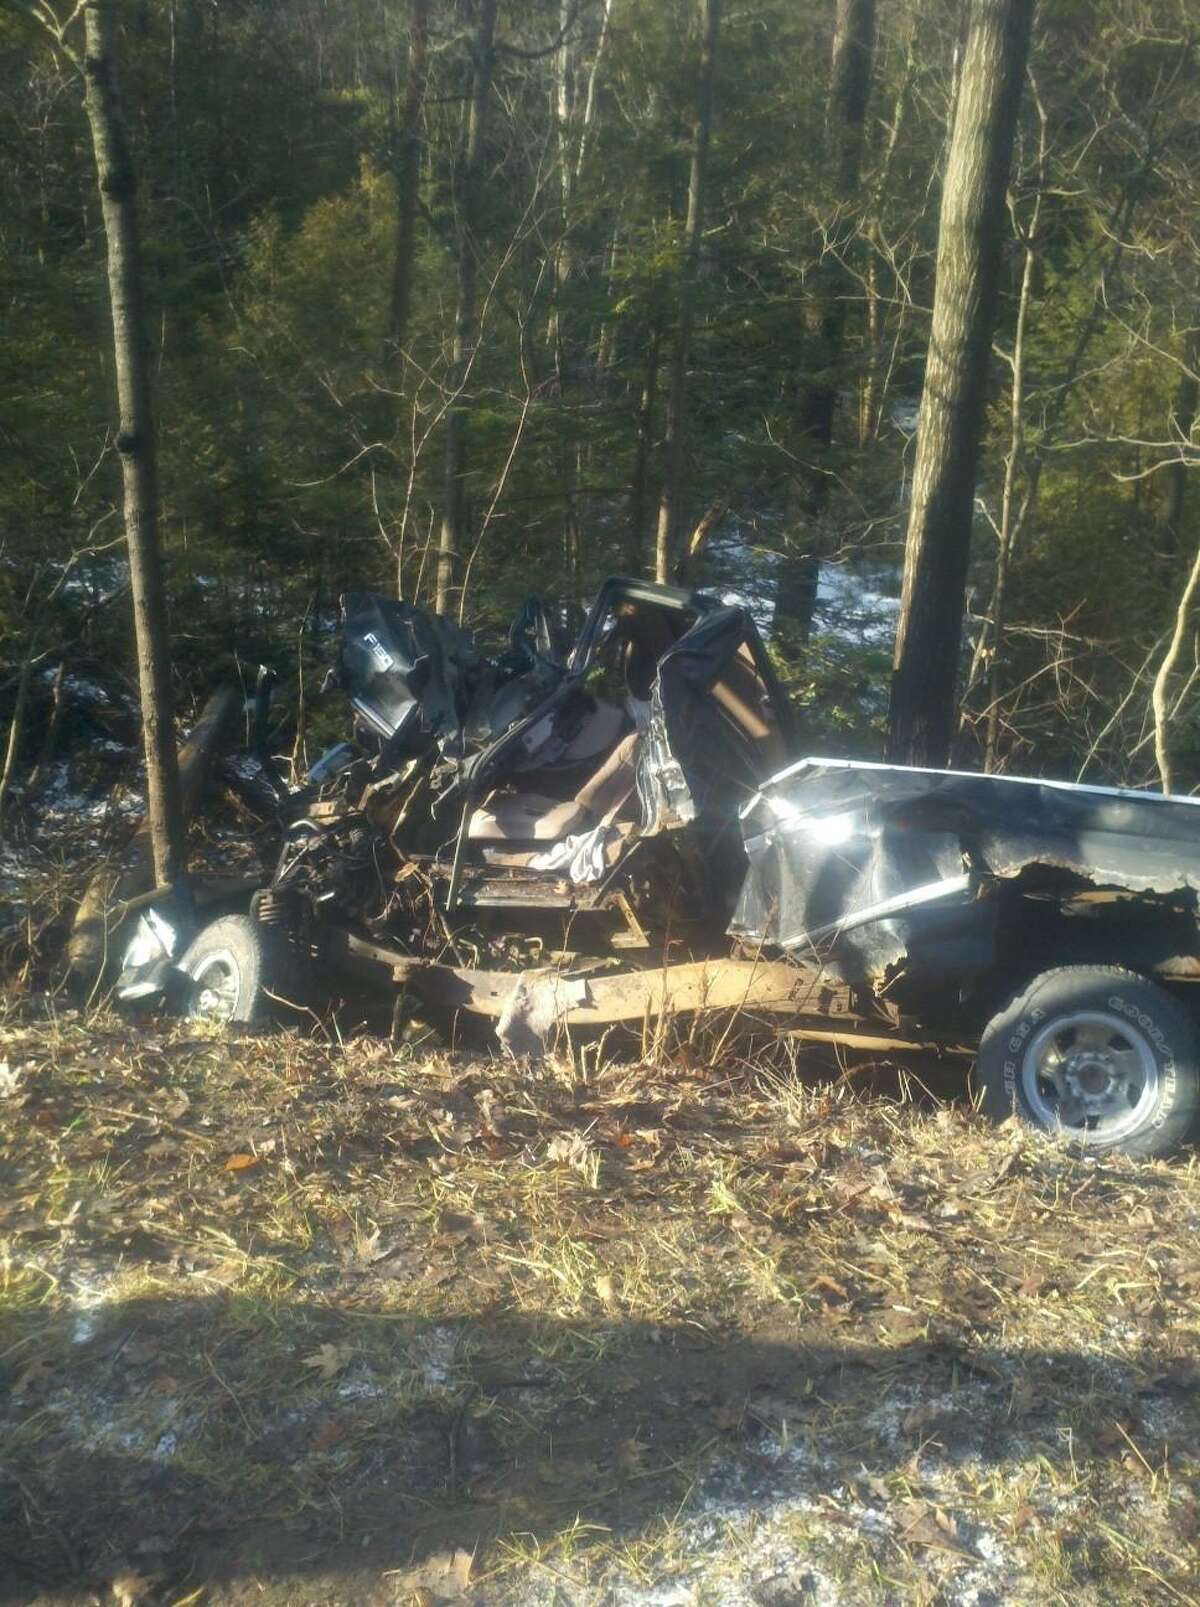 The pickup truck crashed into trees off Swamp Road in Eaton (Photo courtesy Madison County Sheriff's Department)